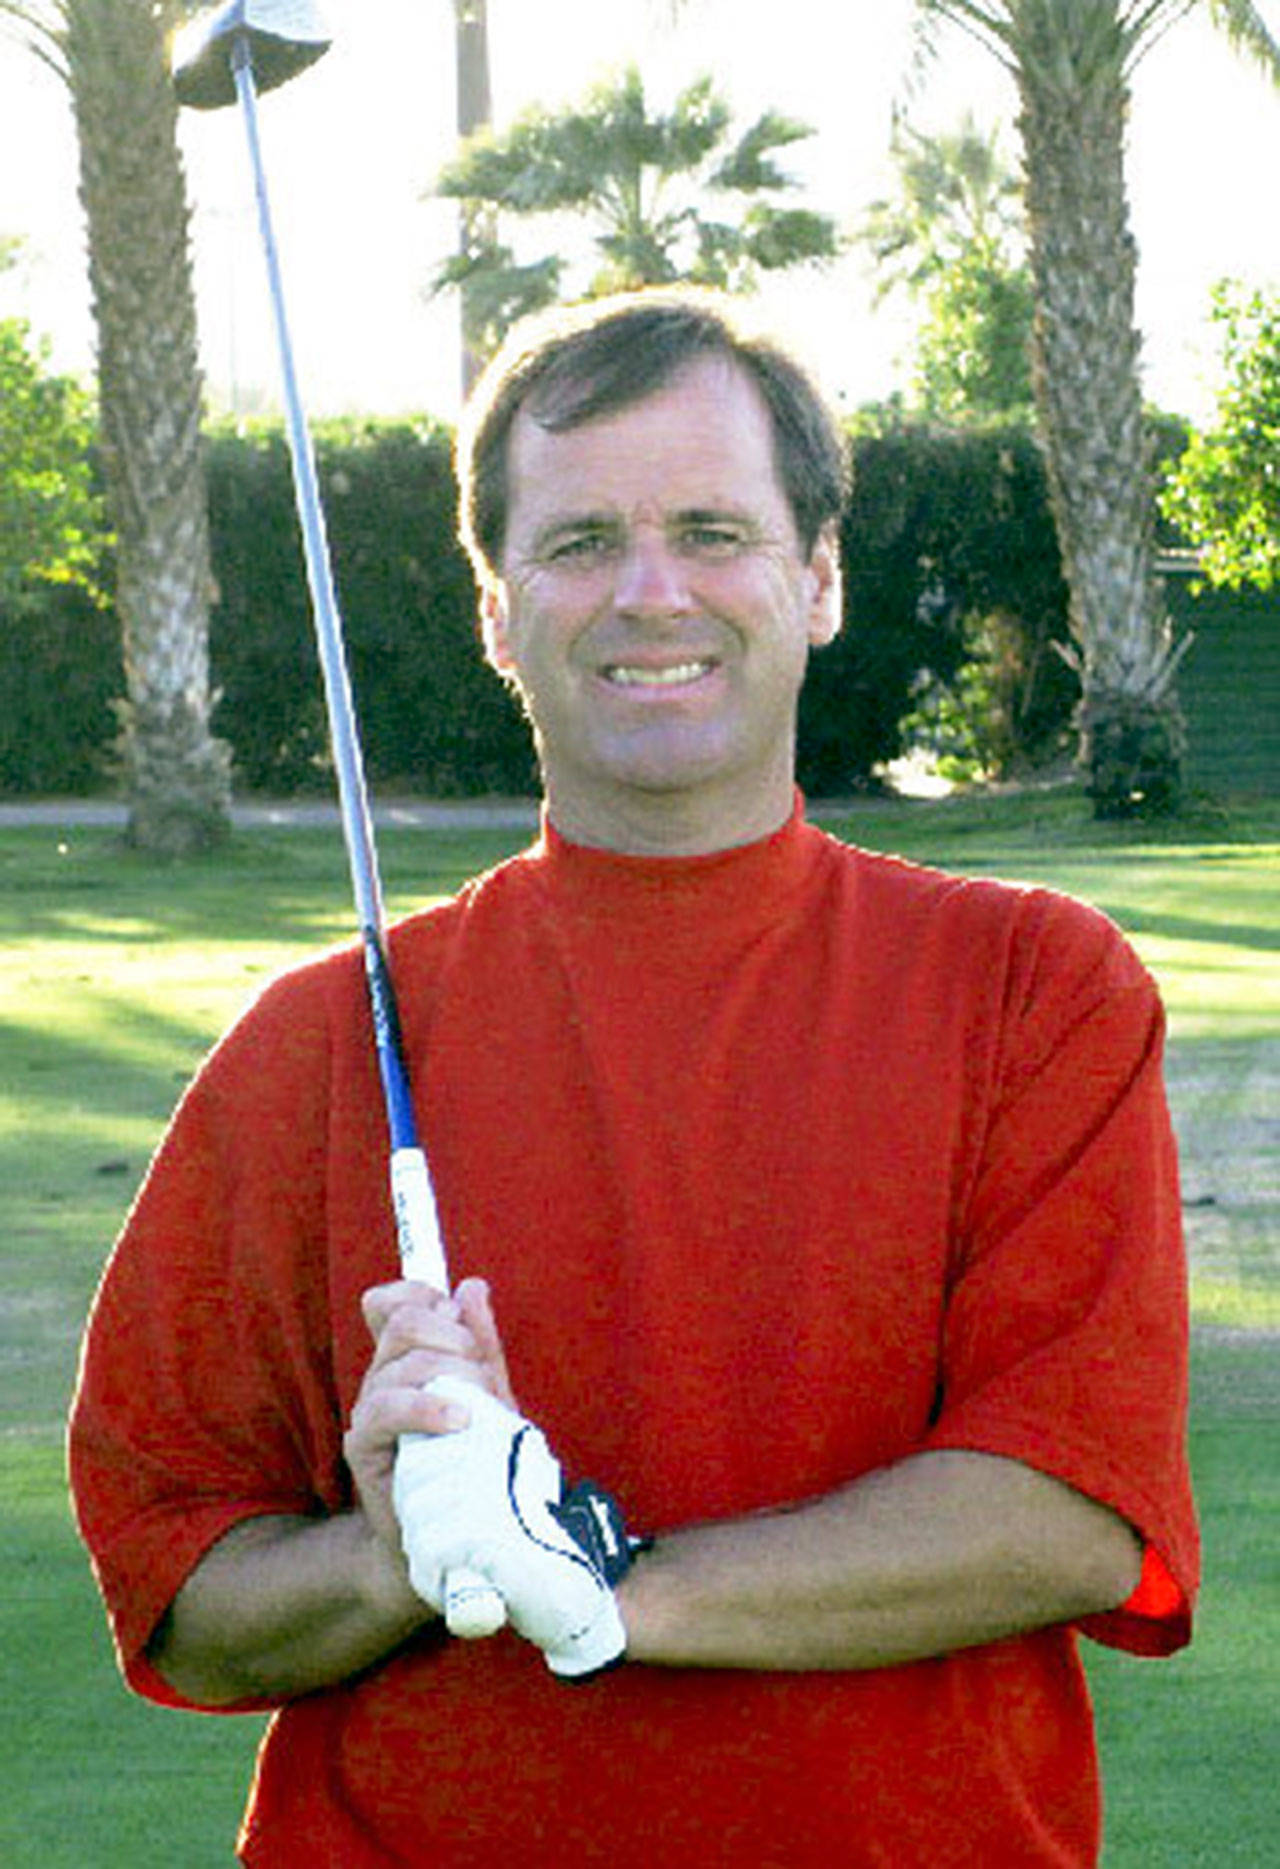 Mark Wurtz, who won two state golf championships at Chimacum High School and later played professional golf on the PGA Tour, died after a lengthy illness last month in La Quinta, Calif.